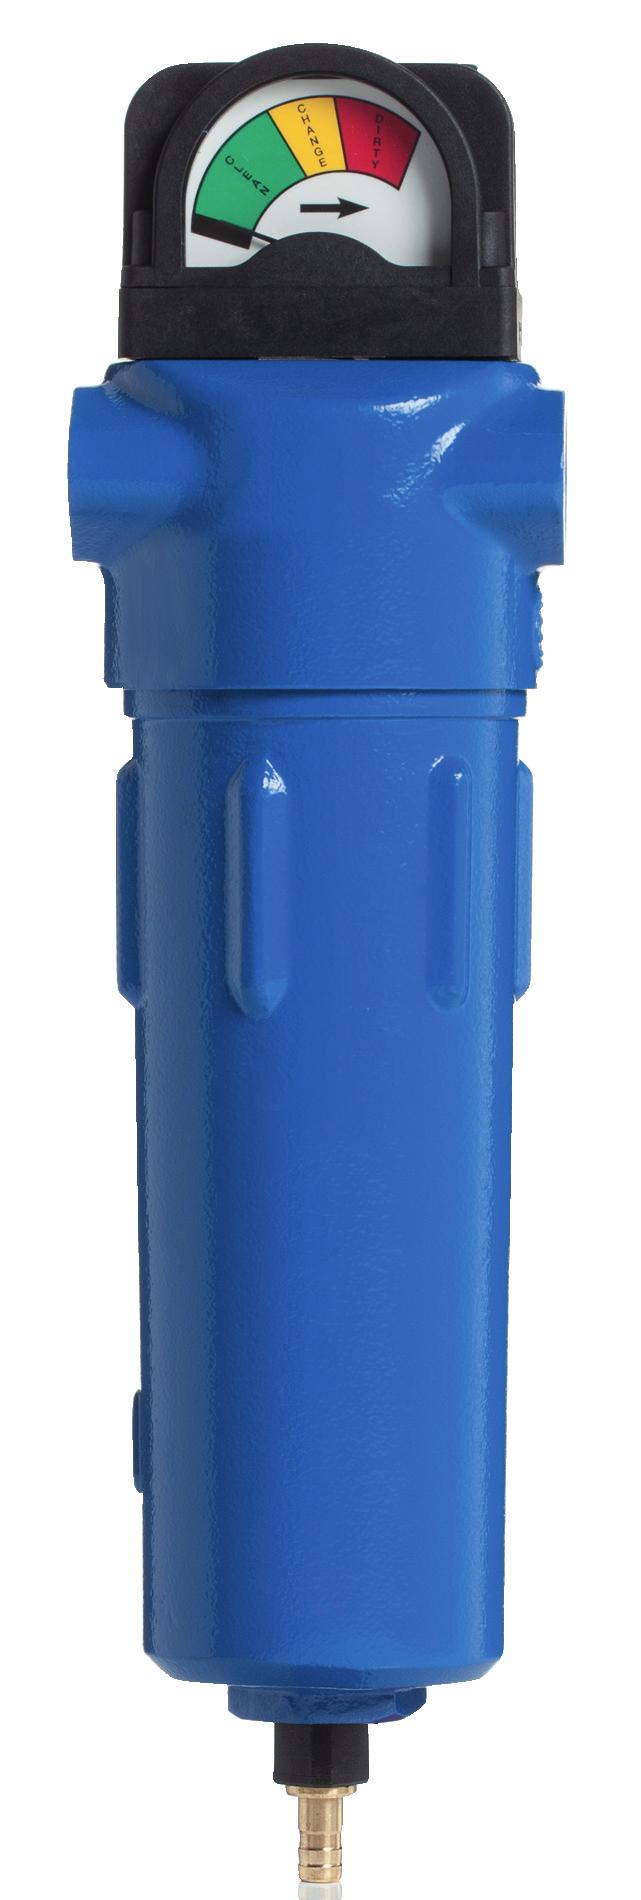 Rev 1.0.1 Page 3 of 9 ECOCLEAN Compressed air filters offer a double advantage Reliability 1. Optimum Operational Reliability Cost 2.